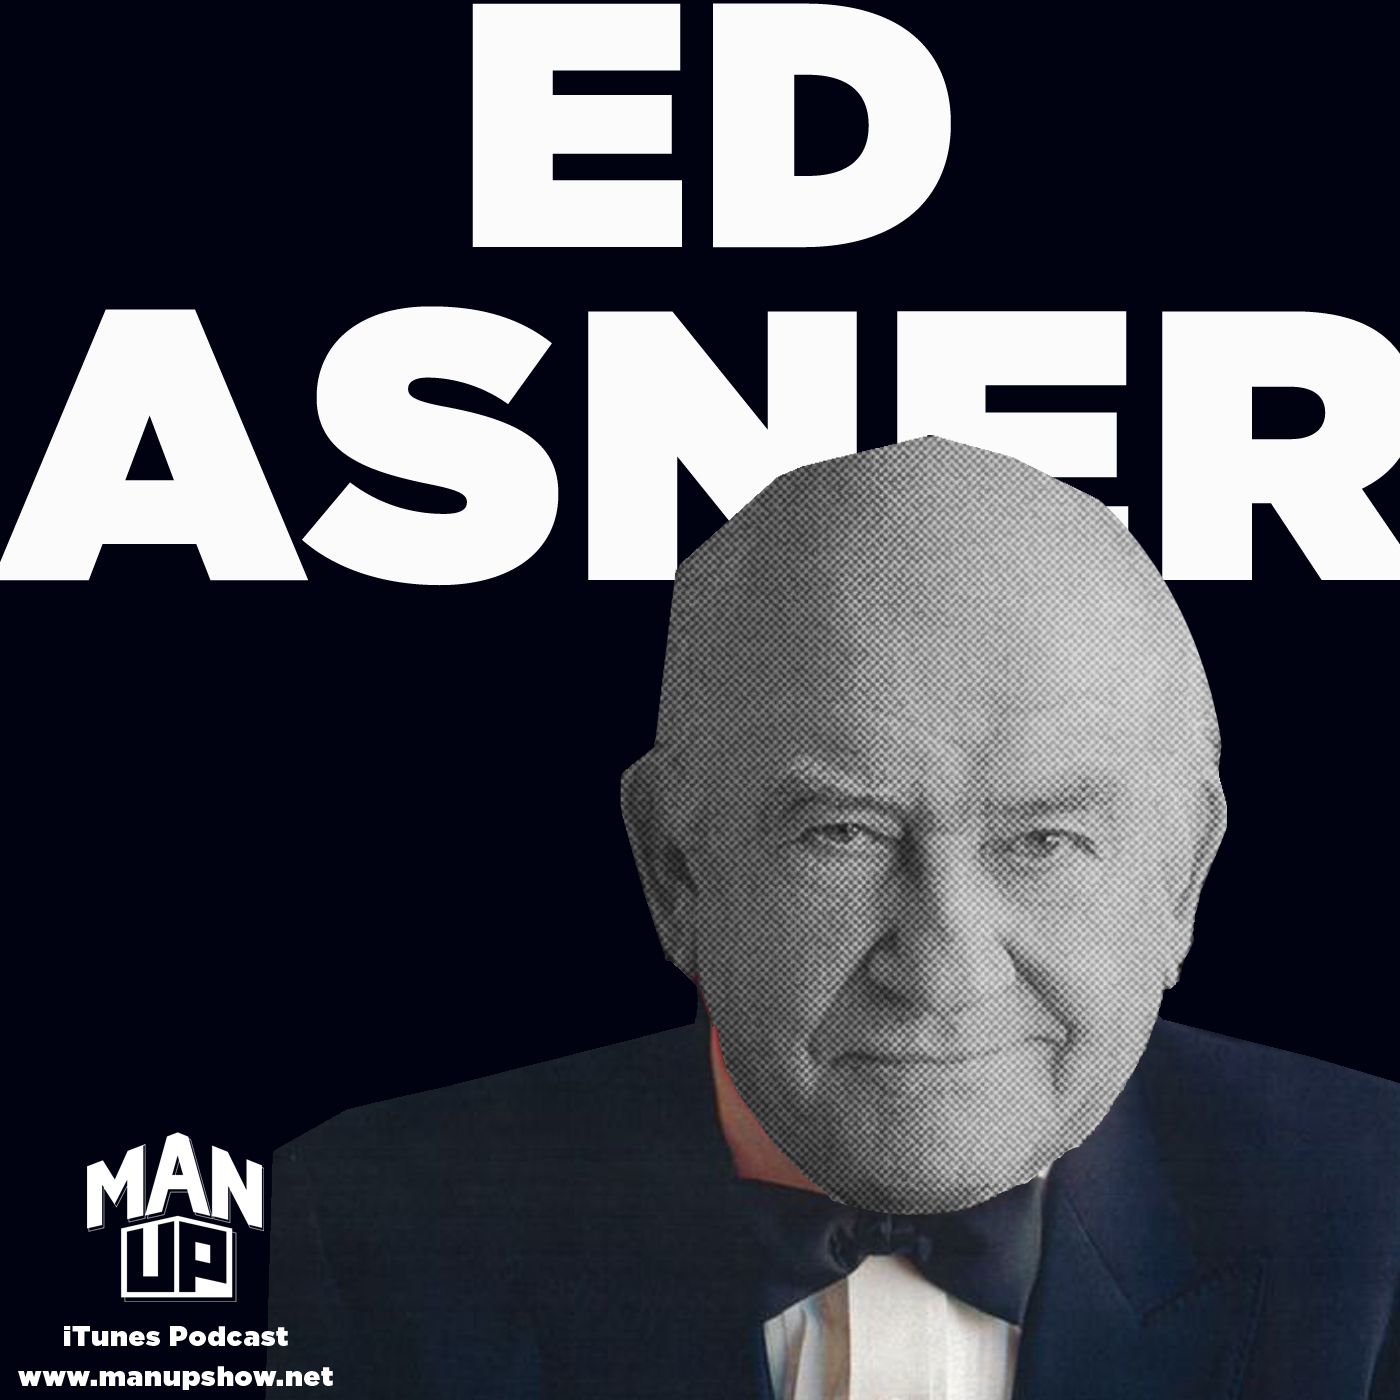 Ed Asner, the most honored, seven times, male performer in the history of the Primetime Emmy Awards!